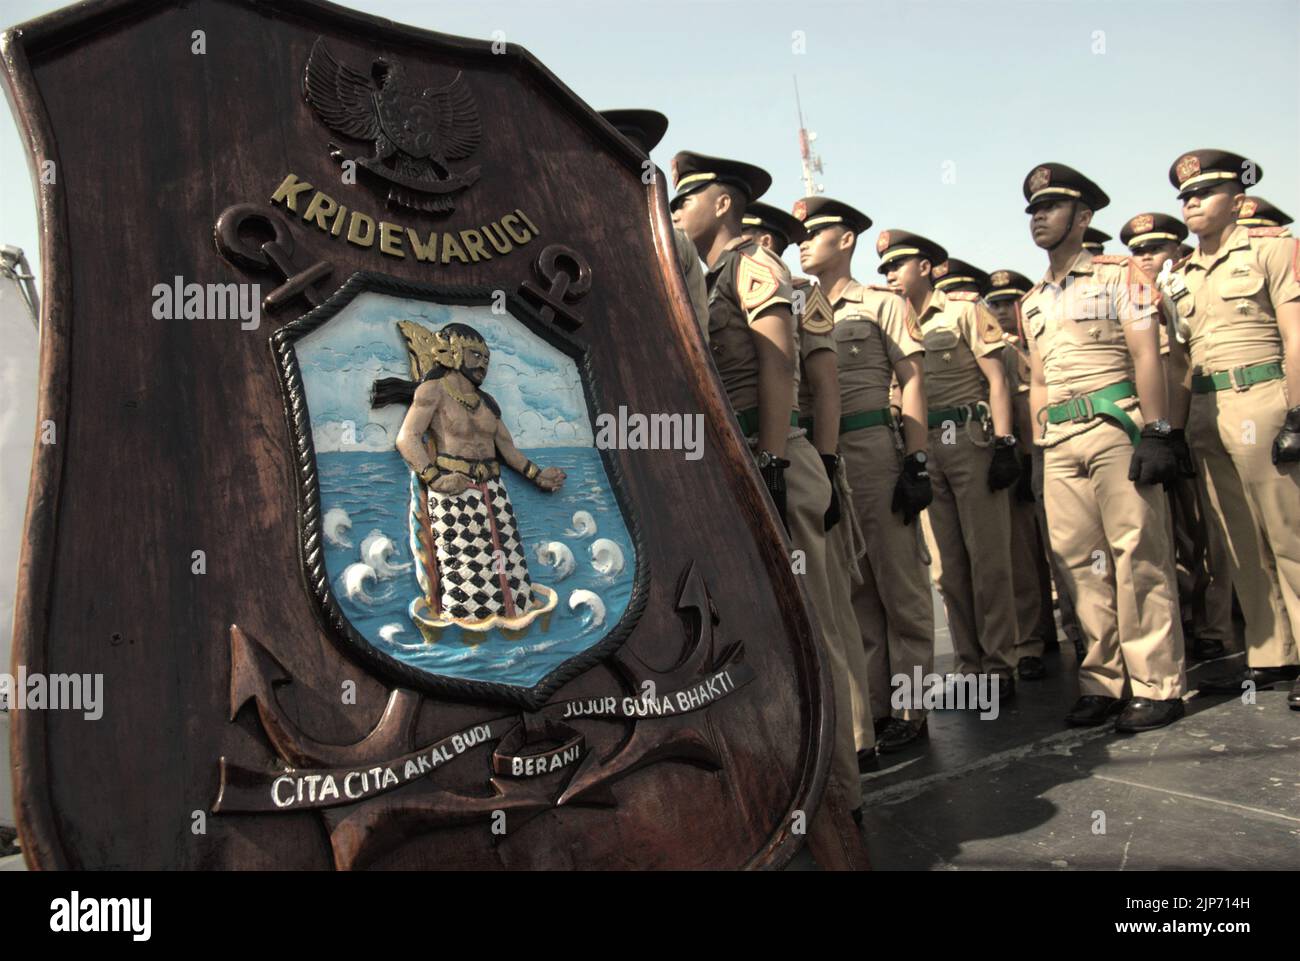 Indonesian navy cadets queueing to walk on the ladder to get onto KRI Dewaruci (Dewa Ruci), an Indonesian tall ship, as the barquentine type schooner is opened for public visitors at Kolinlamil harbour (Navy harbour) in Tanjung Priok, North Jakarta, Jakarta, Indonesia. Stock Photo